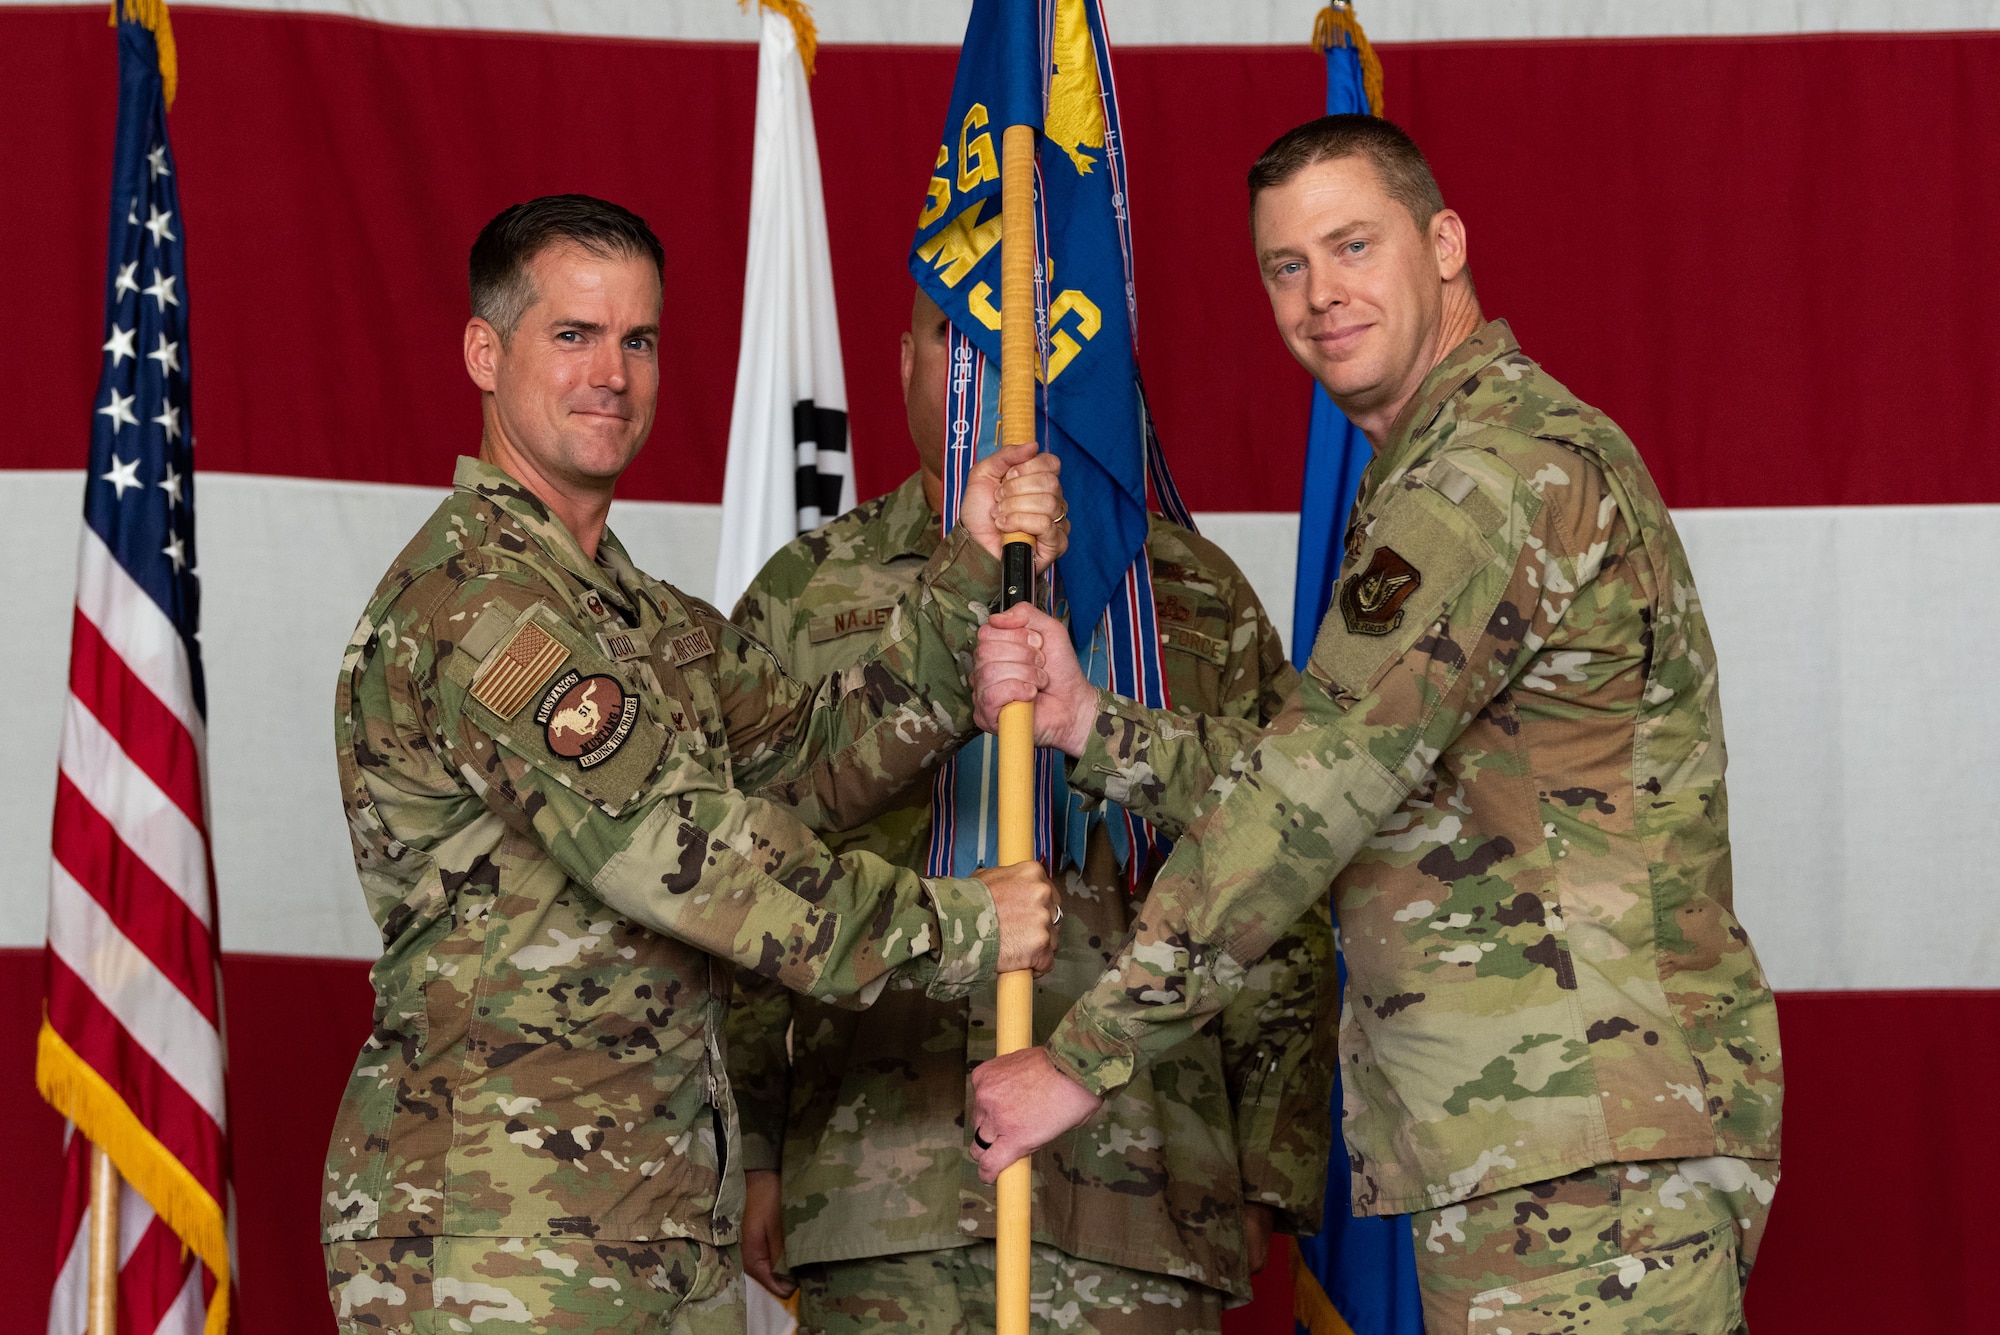 Col. Joshua Wood, 51st Fighter Wing commander, passes the guidon to Col. Kyle Grygo, 51st Mission Support Group incoming commander, during the 51st MSG change of command ceremony at Osan Air Base, Republic of Korea, July 13, 2022.